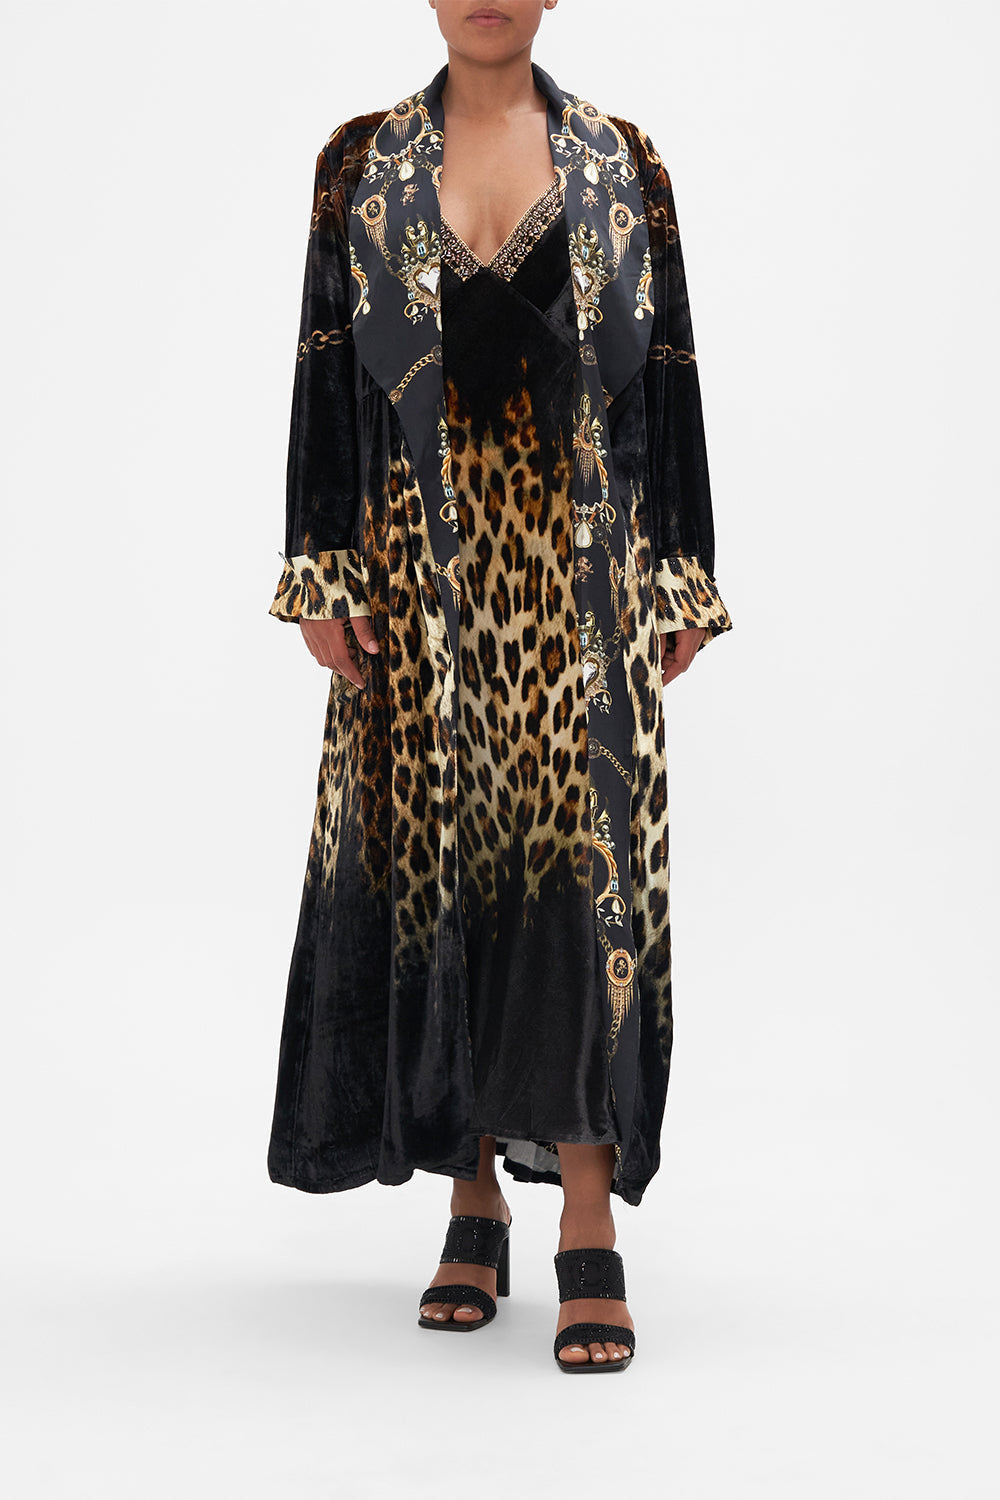 Front view of model wearing CAMILLA vlevet robe in Jungle Dreaming print